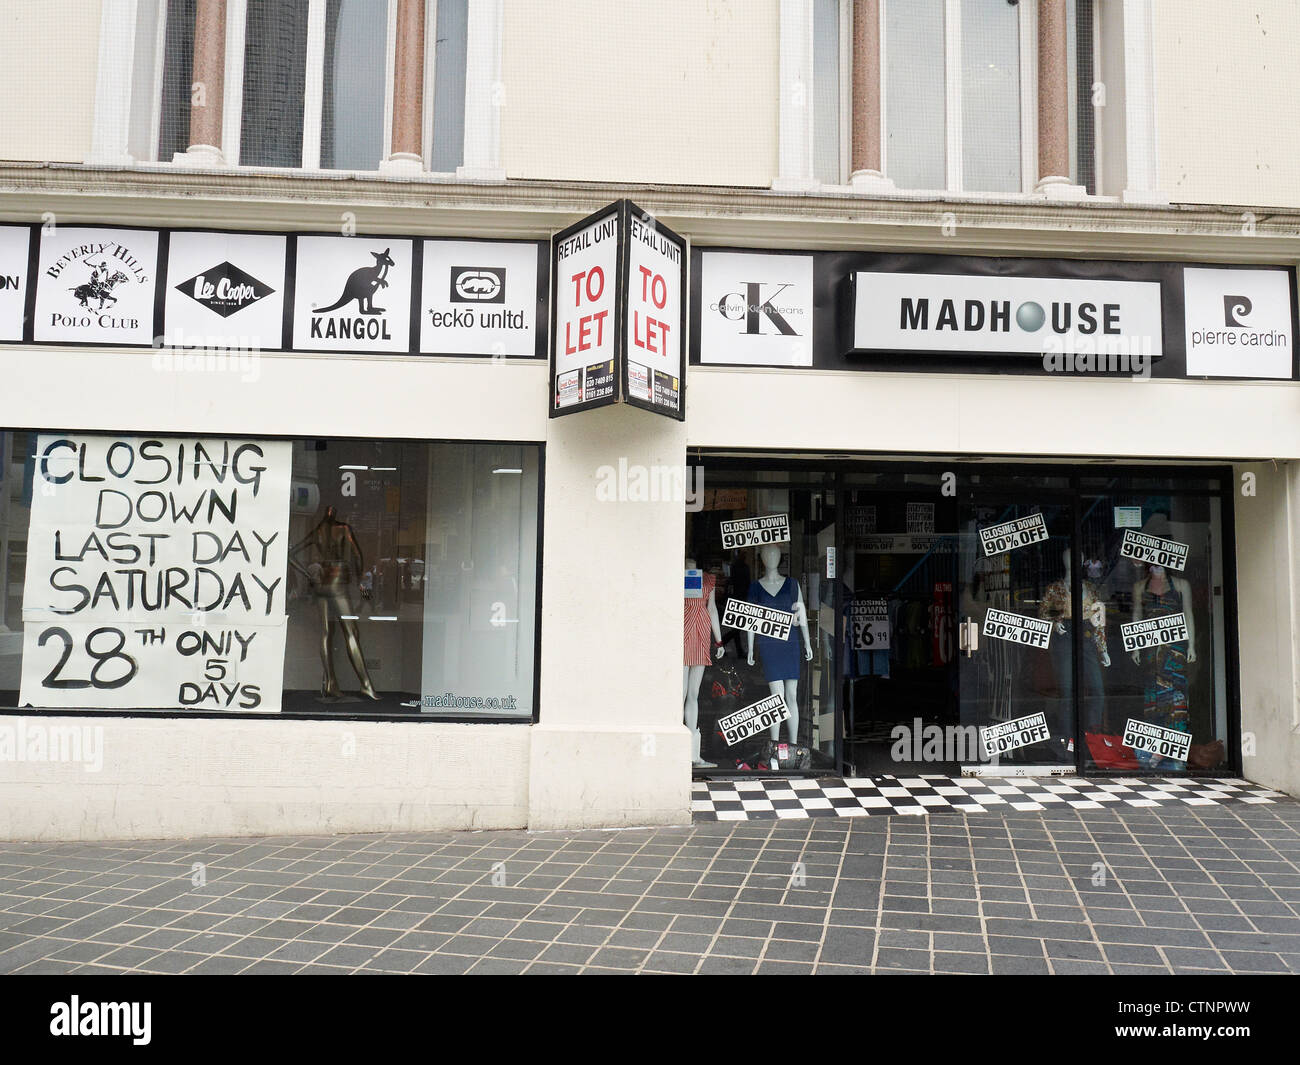 Madhouse clothing store closing down in Liverpool UK Stock Photo